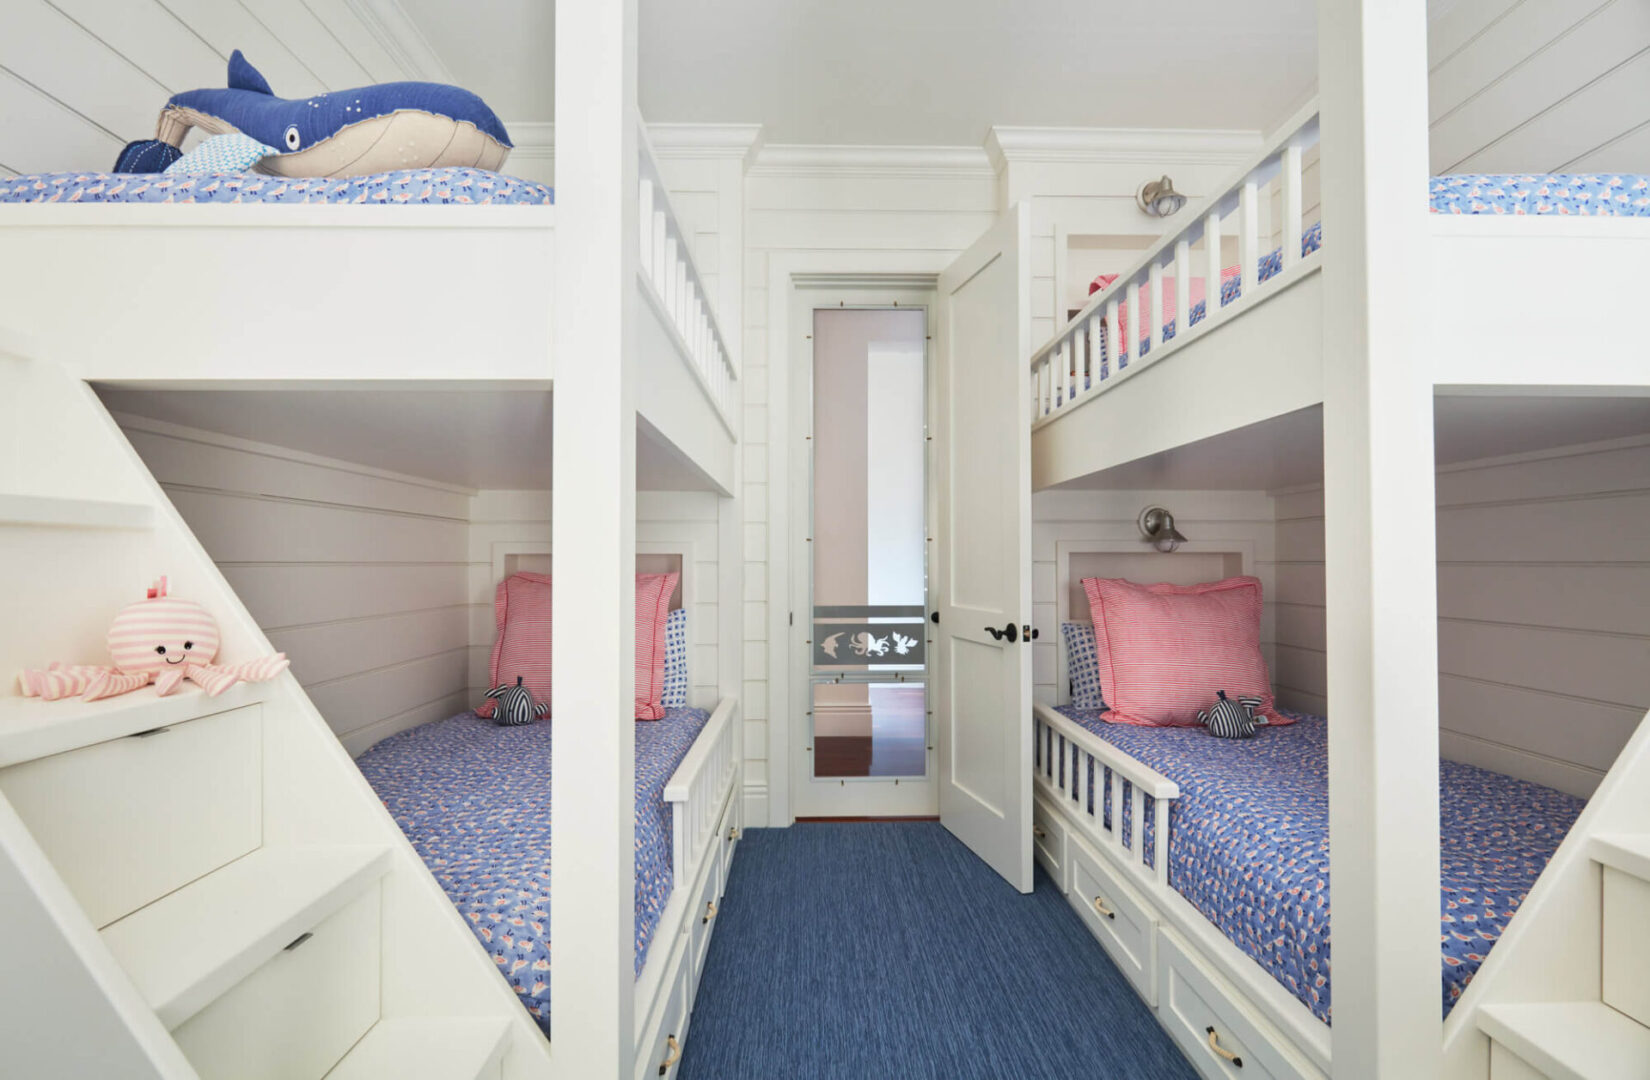 A room with bunk beds and stairs leading to the second floor.